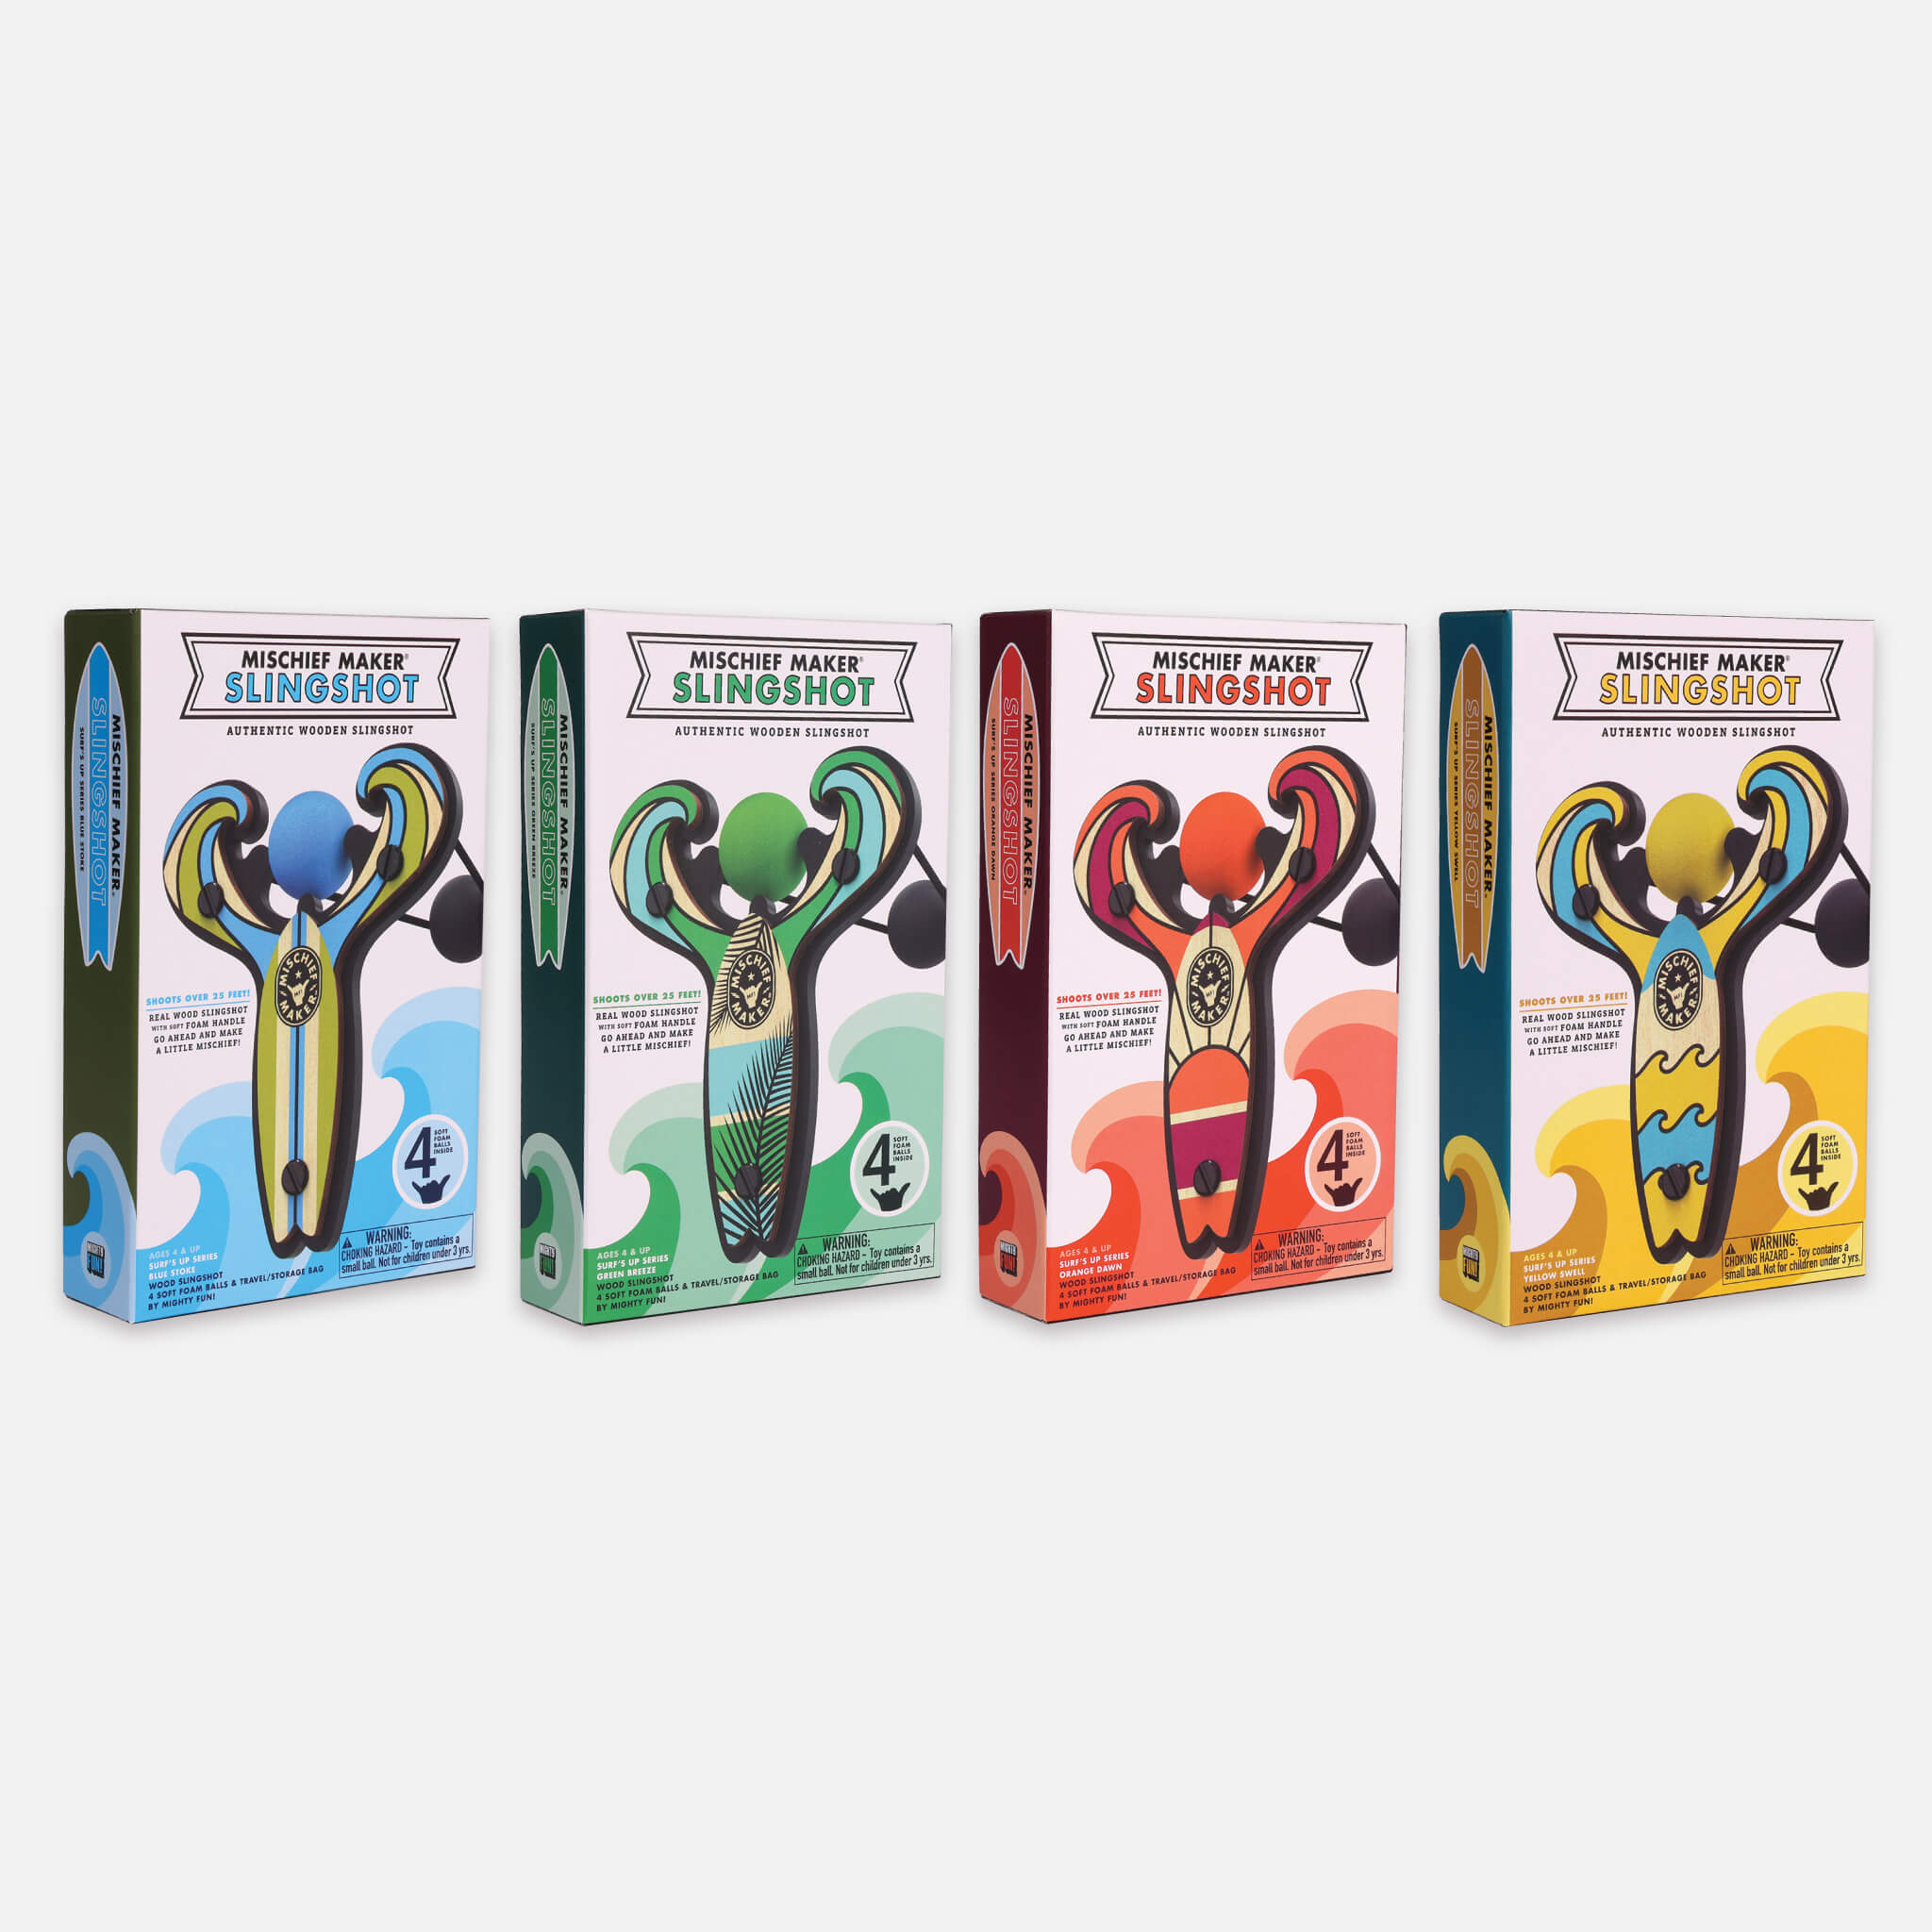 Surf’s Up toy slingshot color gift boxes including blue, green, orange, and yellow by Mighty Fun!